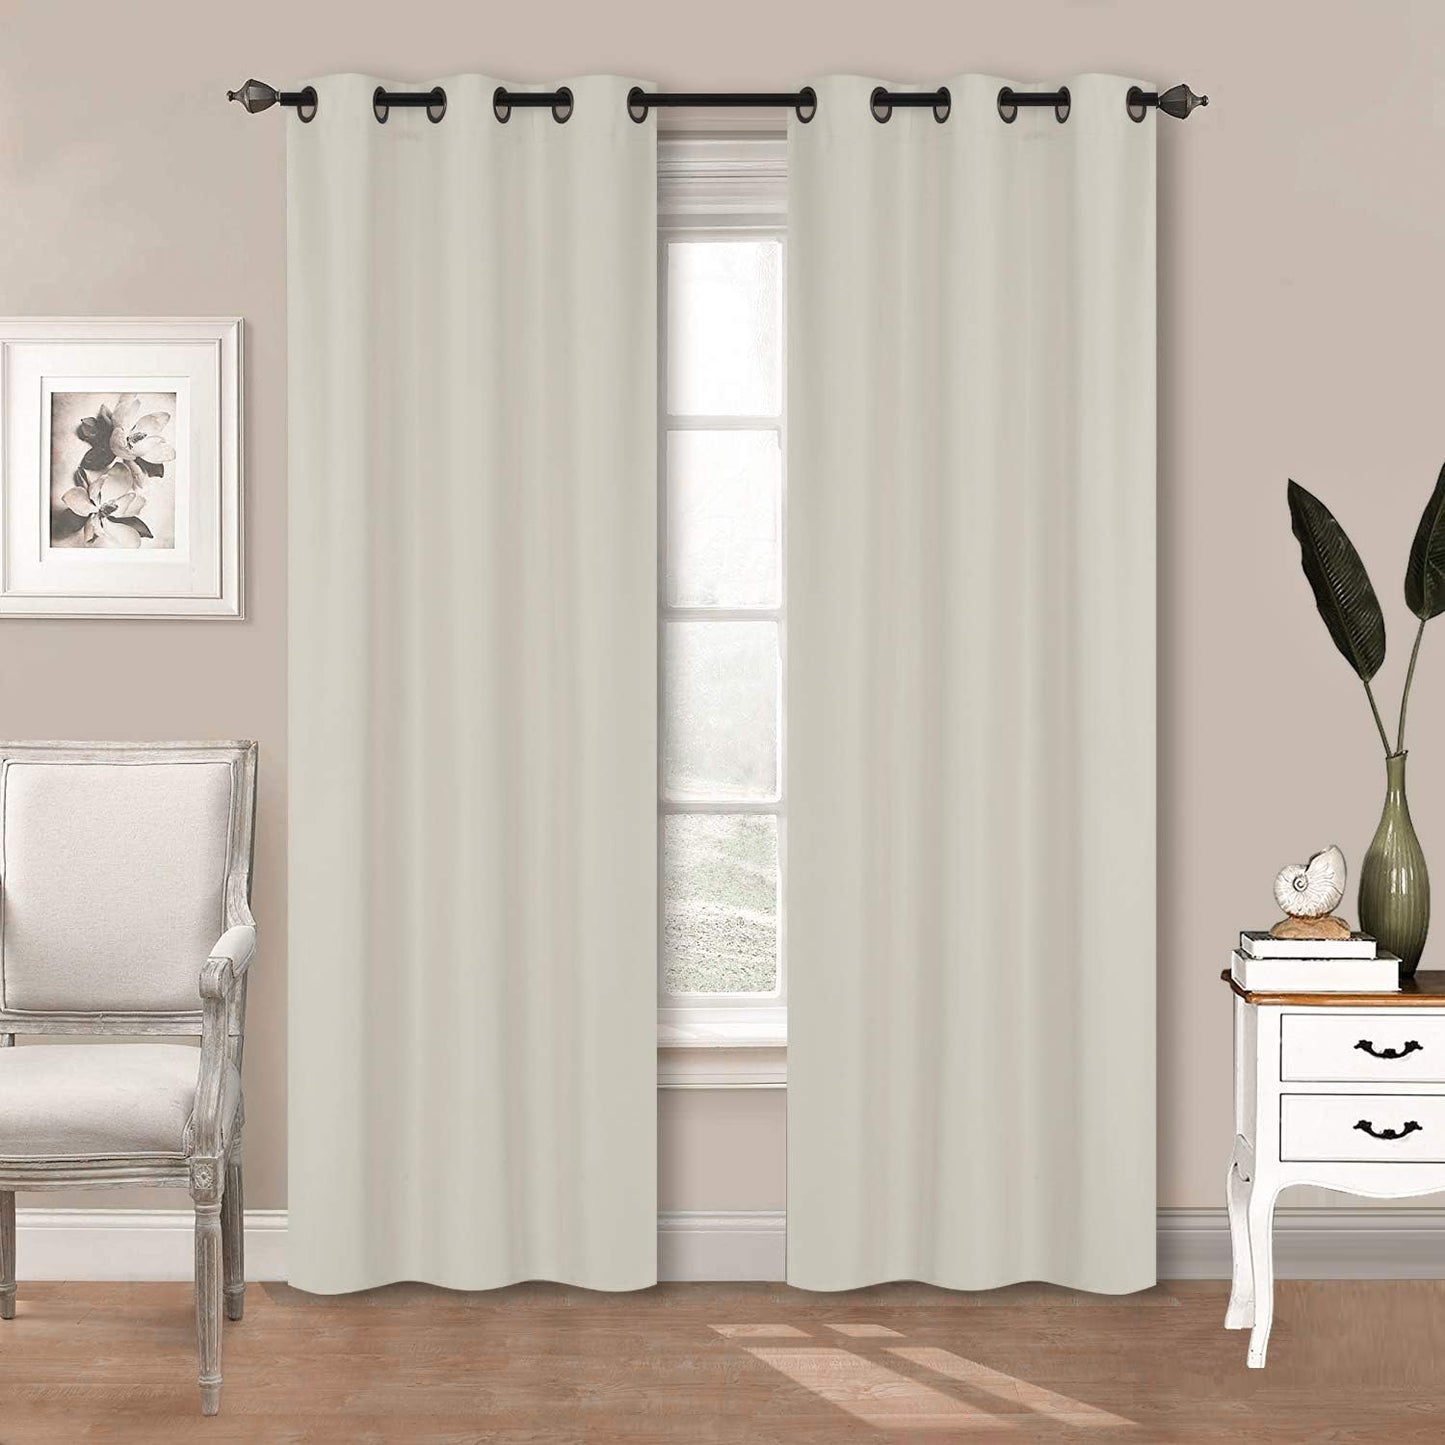 Home Collection 2 Panels 100% Blackout Curtain Set Solid Color with Rod Pocket Grommet Drapes for Kitchen, Dinning Room, Bathroom, Bedroom,Living Room Window New (74” Wide X 62” Long, Ivory)  Kids Zone home Linen Ivory 74” Wide X 83” Long 